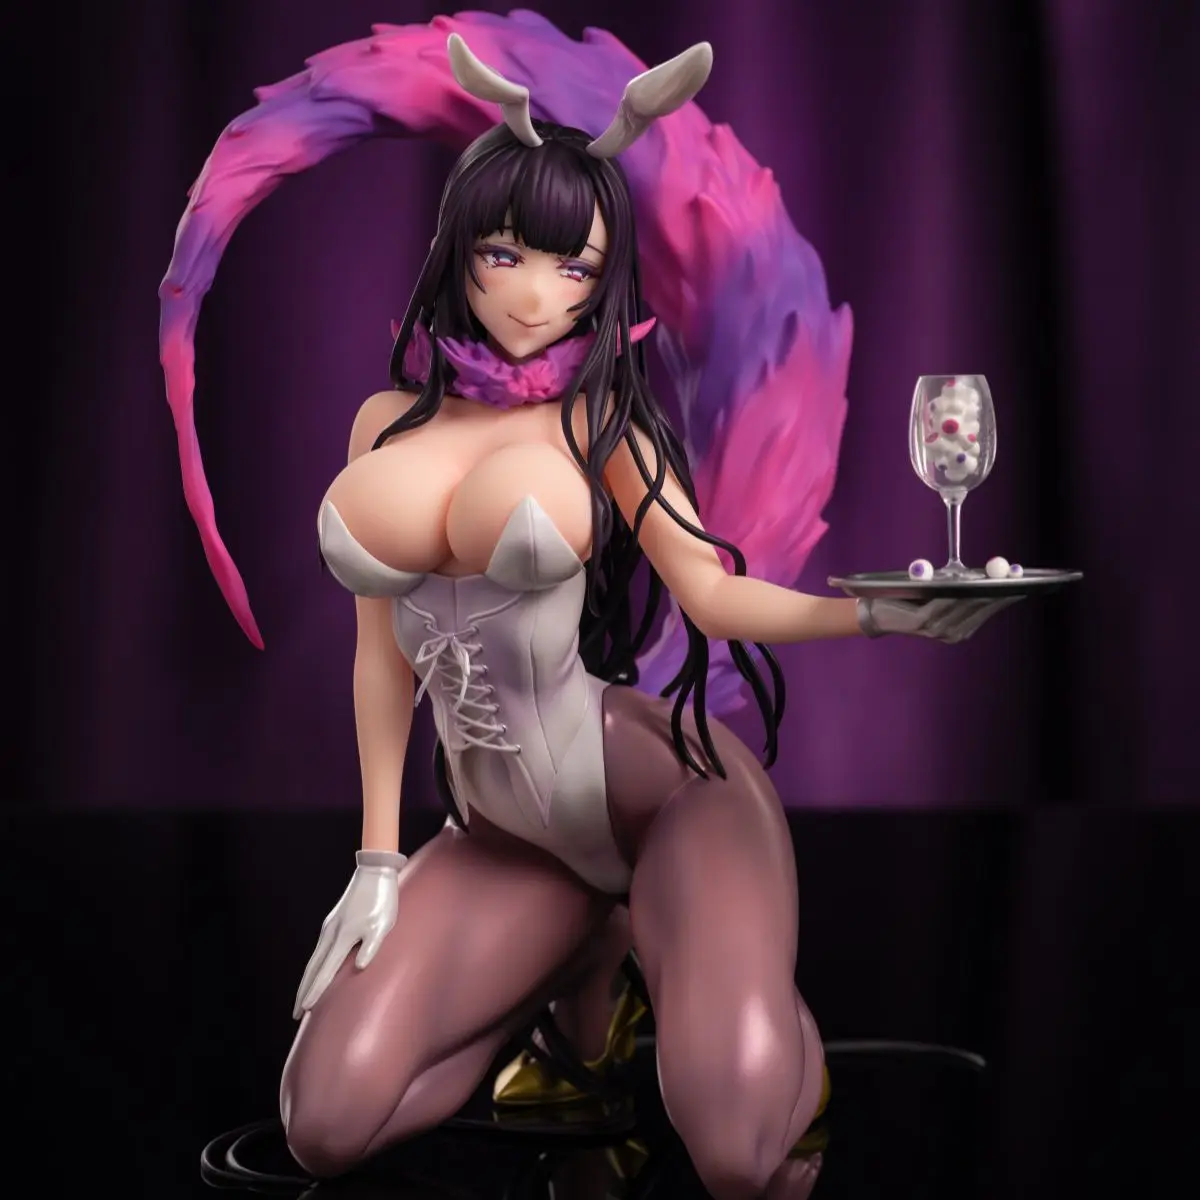 

215mm Ane Naru Mono Chiyo 1/6 Devil Sister Unnamable Bunny Sommelier Anime Figure Sexy Girl Model Toys Collection Doll Gift